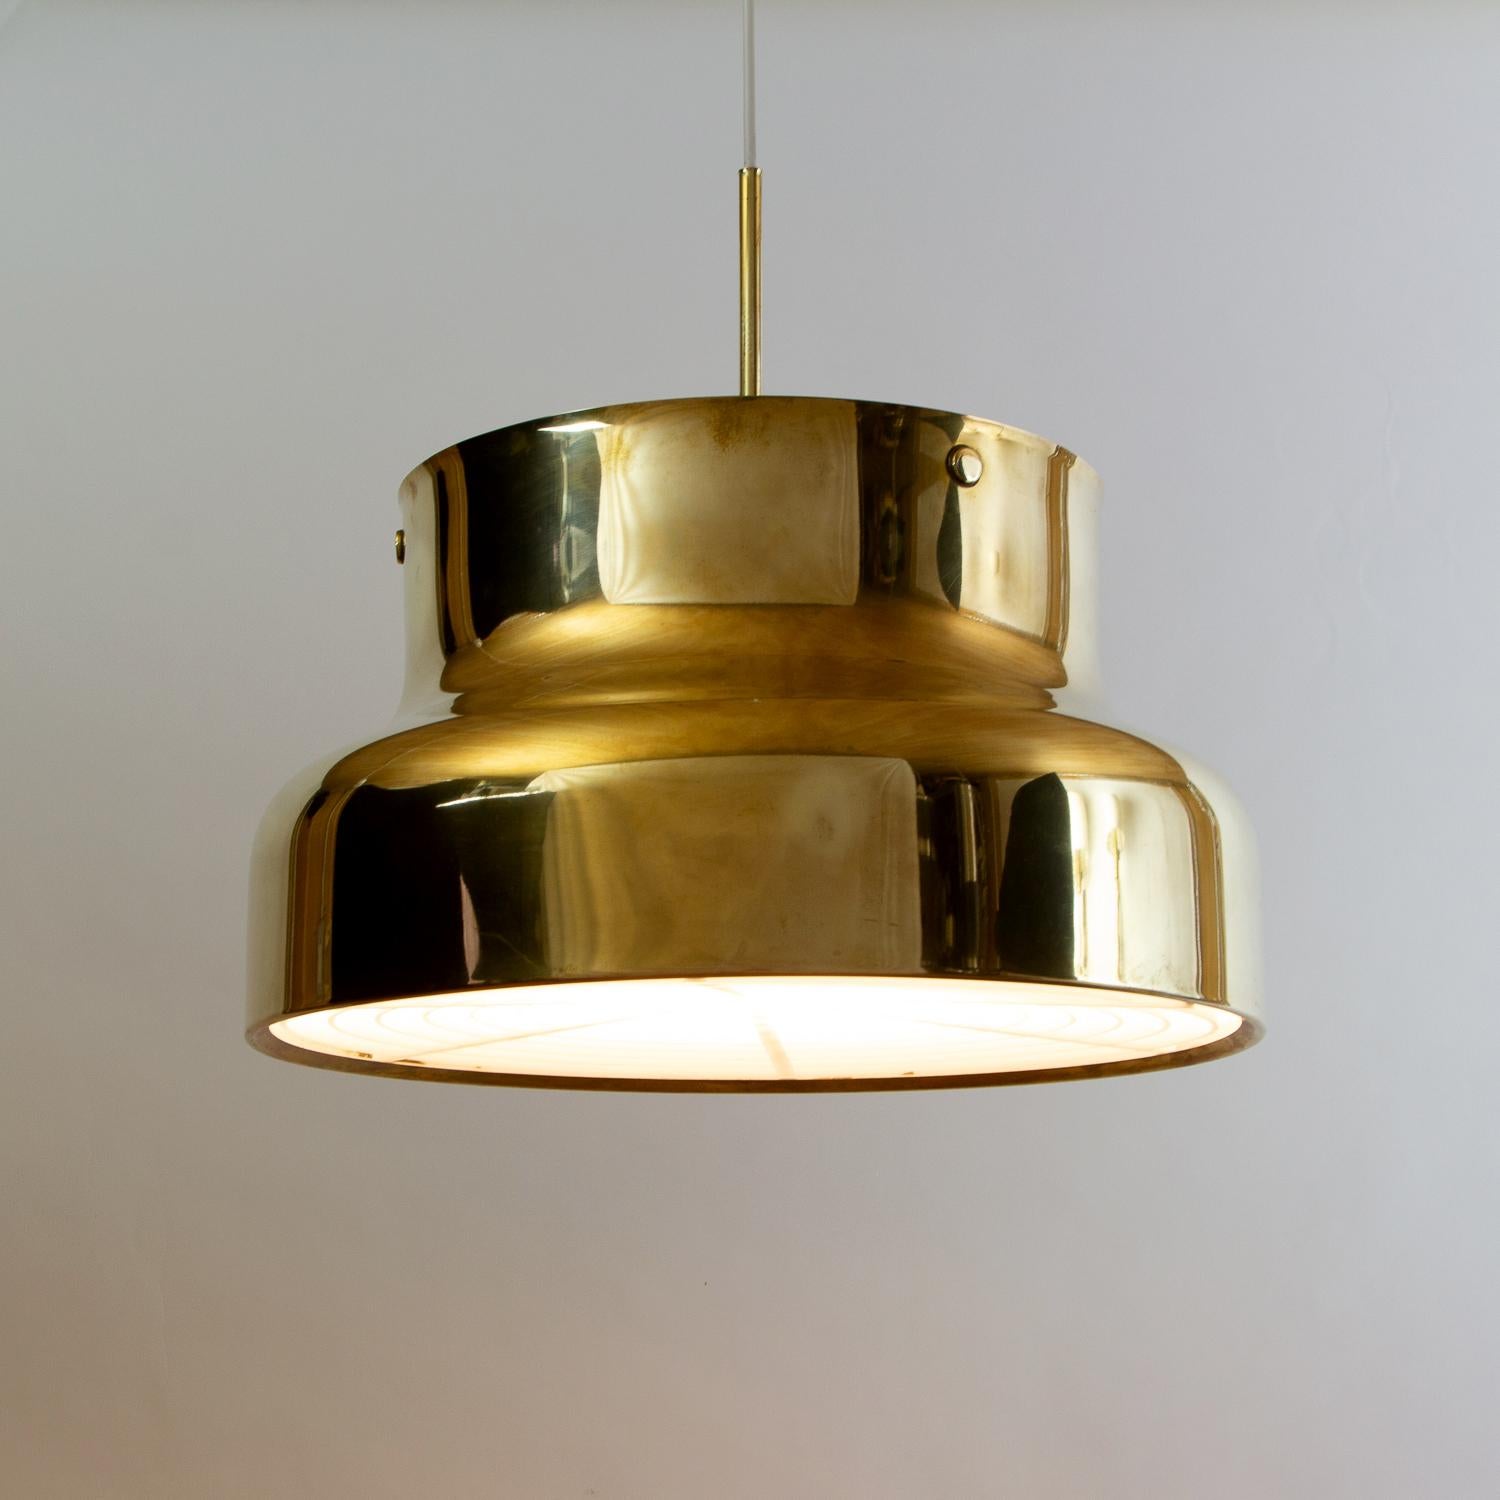 Mid-20th Century Brass Bumling Pendant Light by Anders Pehrson for Ateljé Lyktan, Sweden, 1960s